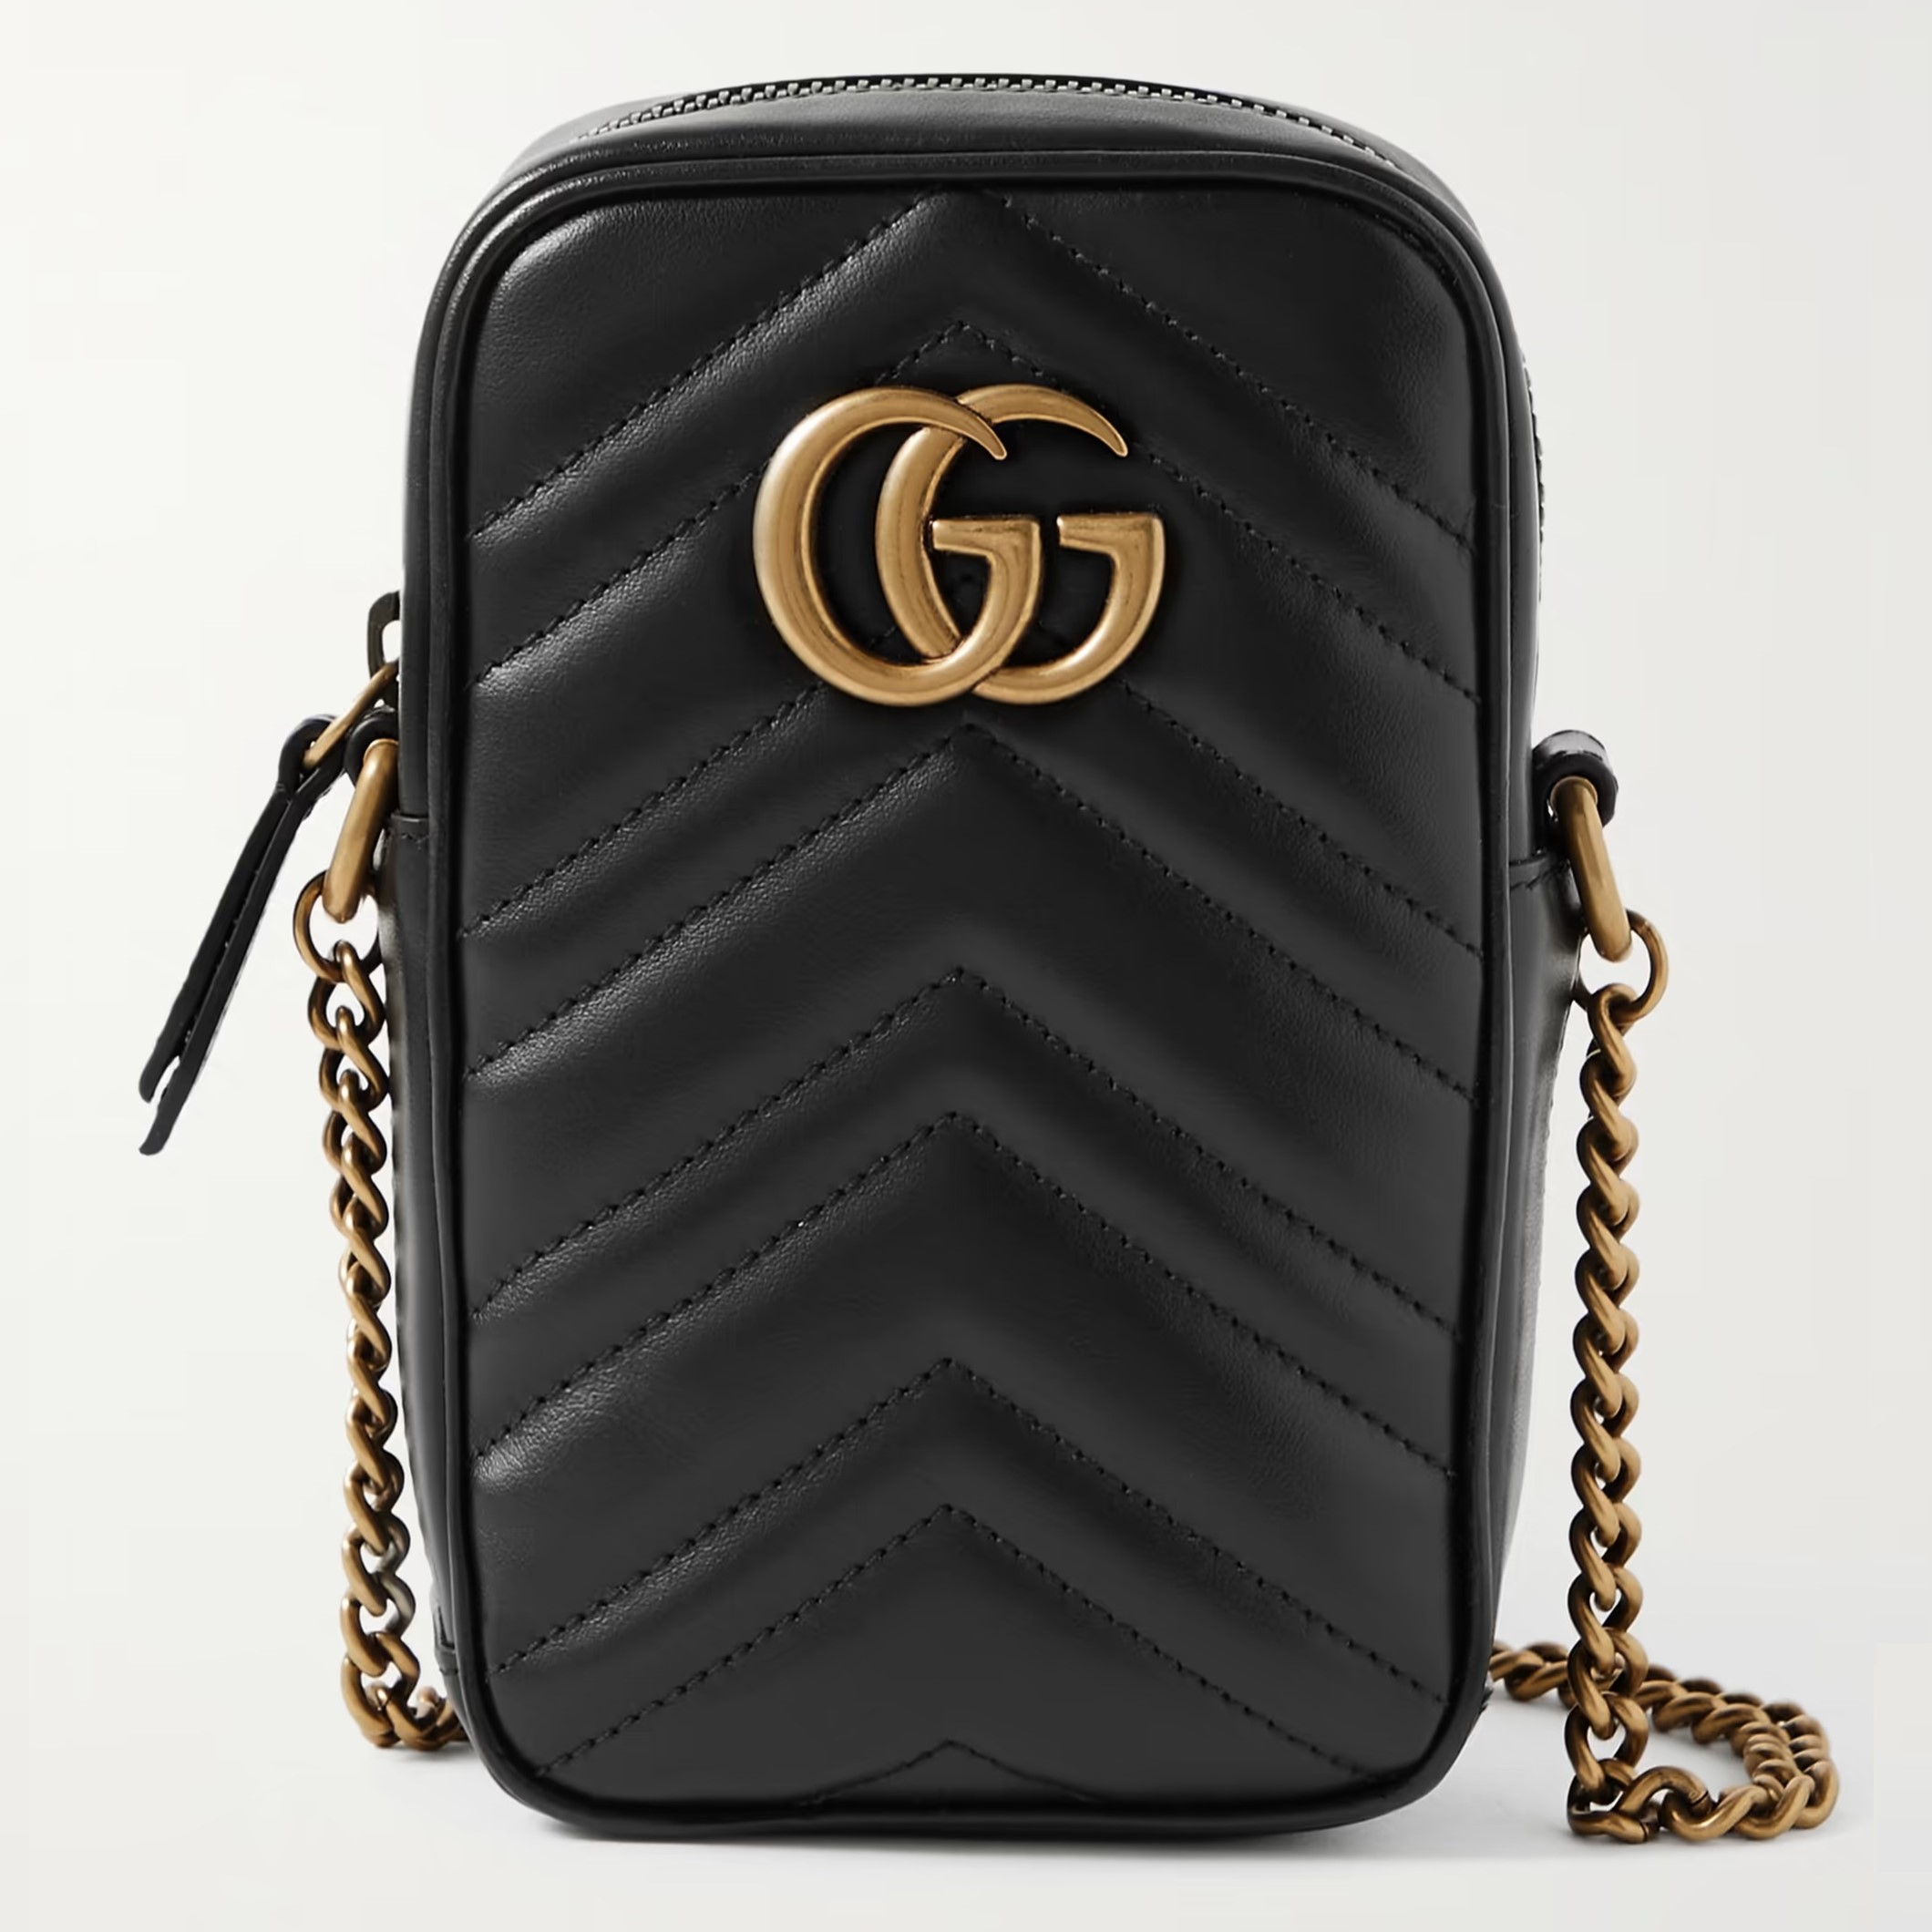 TÚI NỮ ĐEO ĐIỆN THOẠI GUCCI GG MARMONT MINI BLACK QUILTED LEATHER POUCH 4